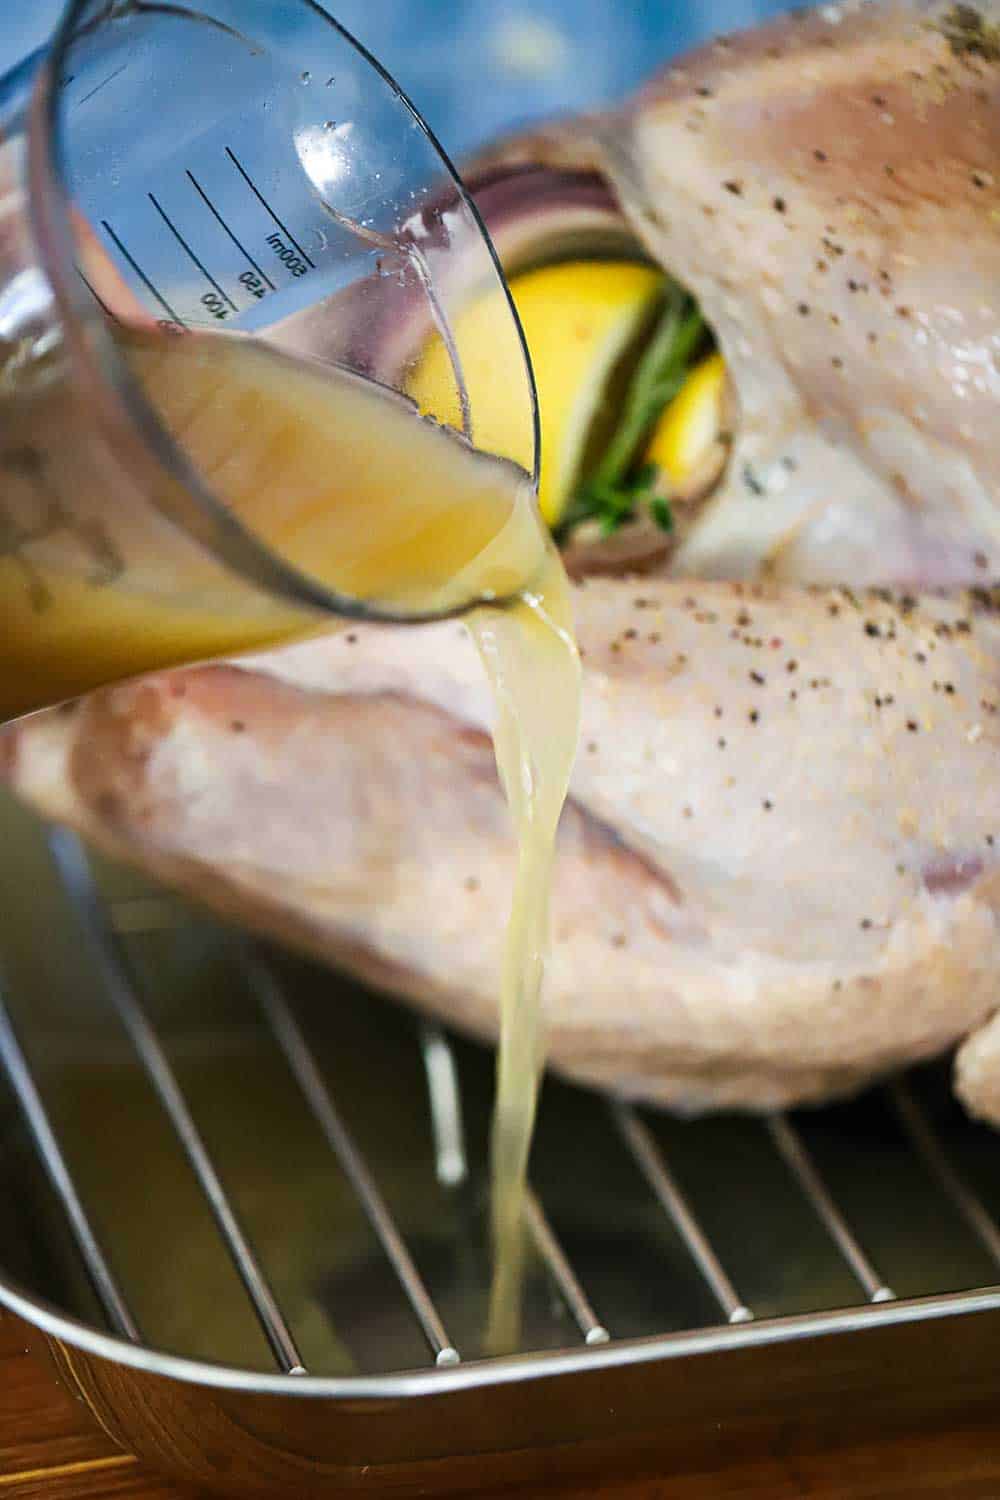 Chicken stock being poured into a roasting pan that has a fresh turkey in it.